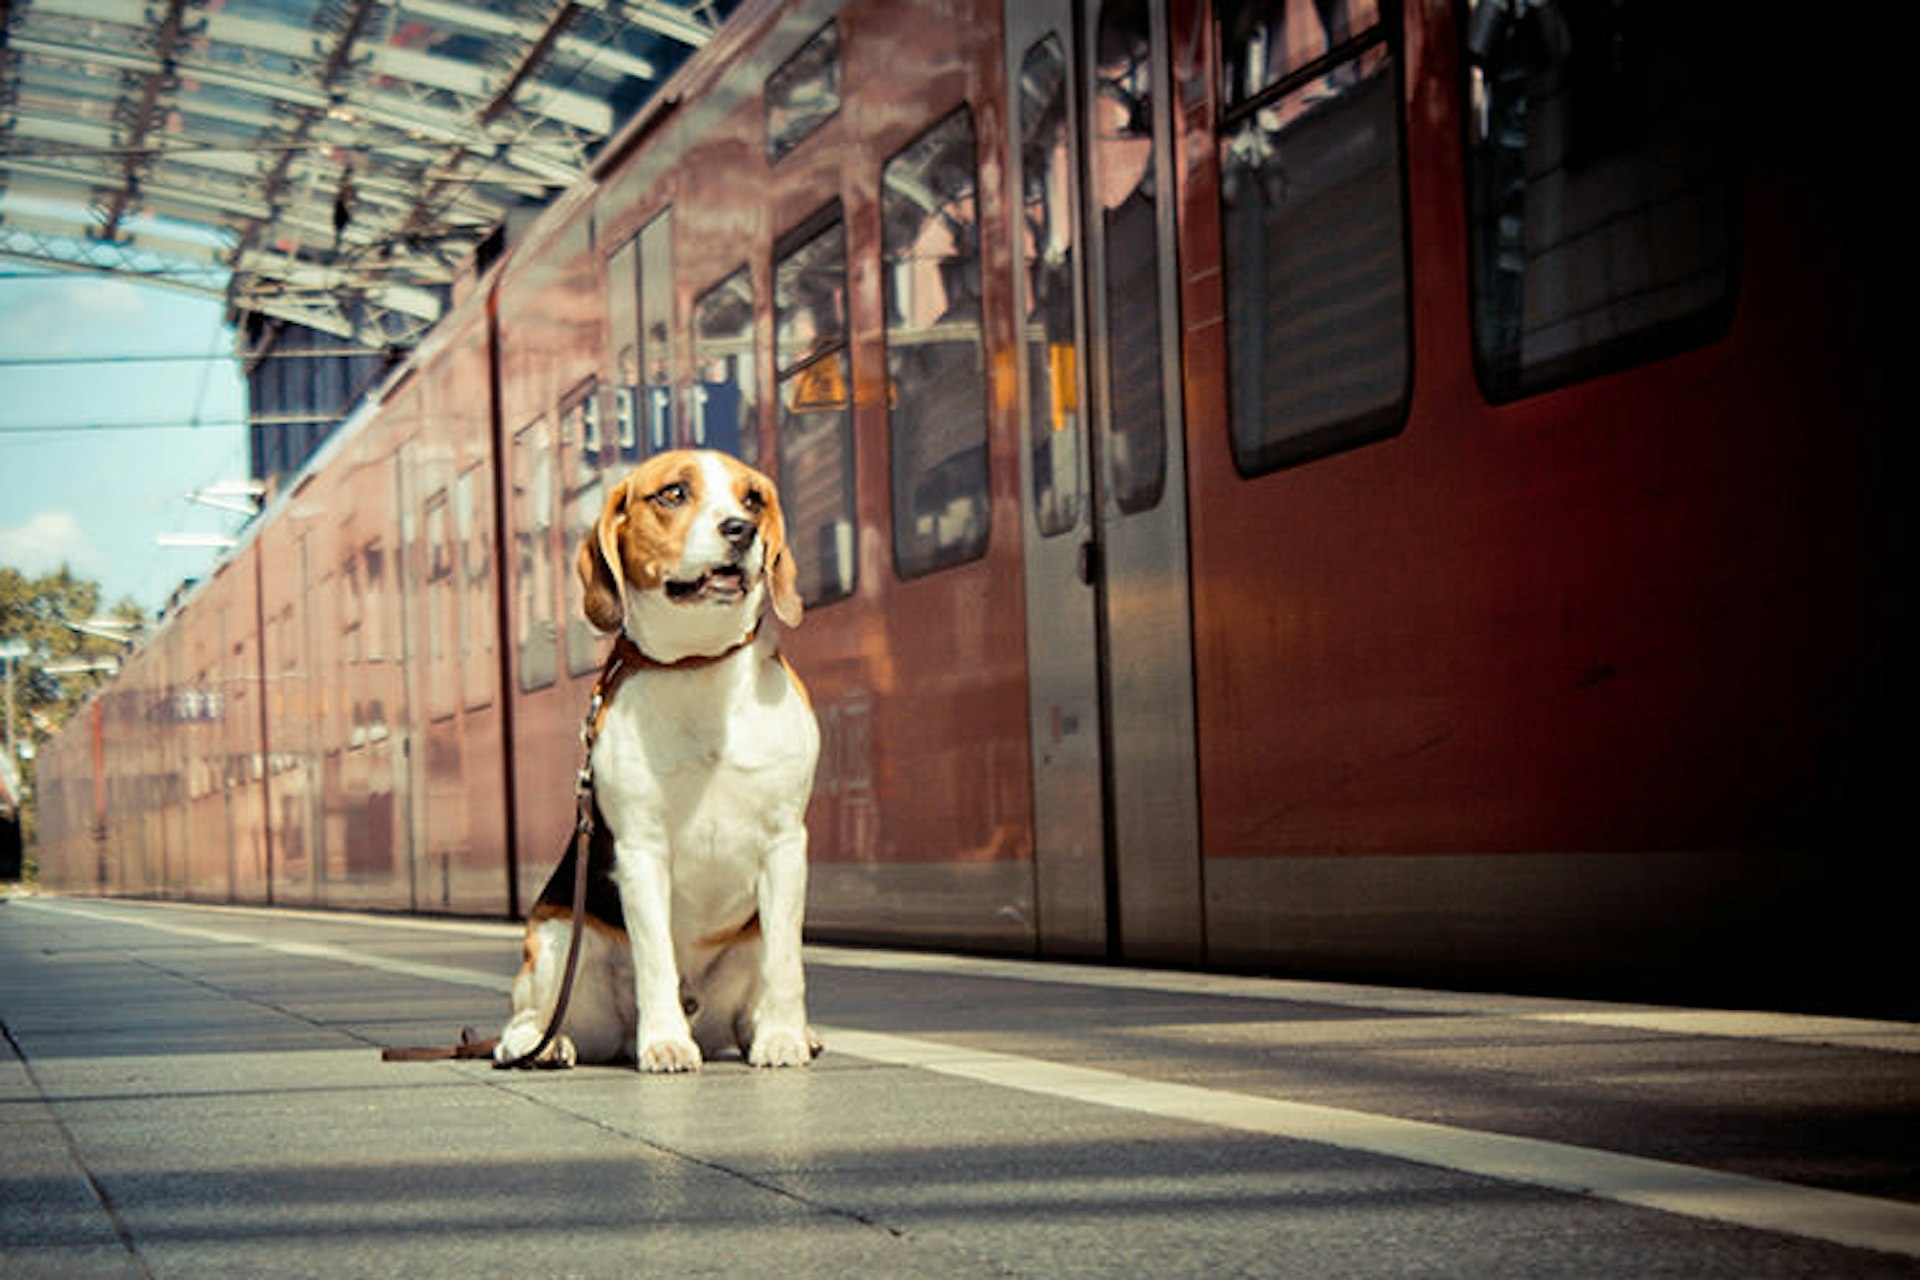 Leave him in a happy place - in this case, the station platform. Image by Benita Hartmann / Moment / Getty Images